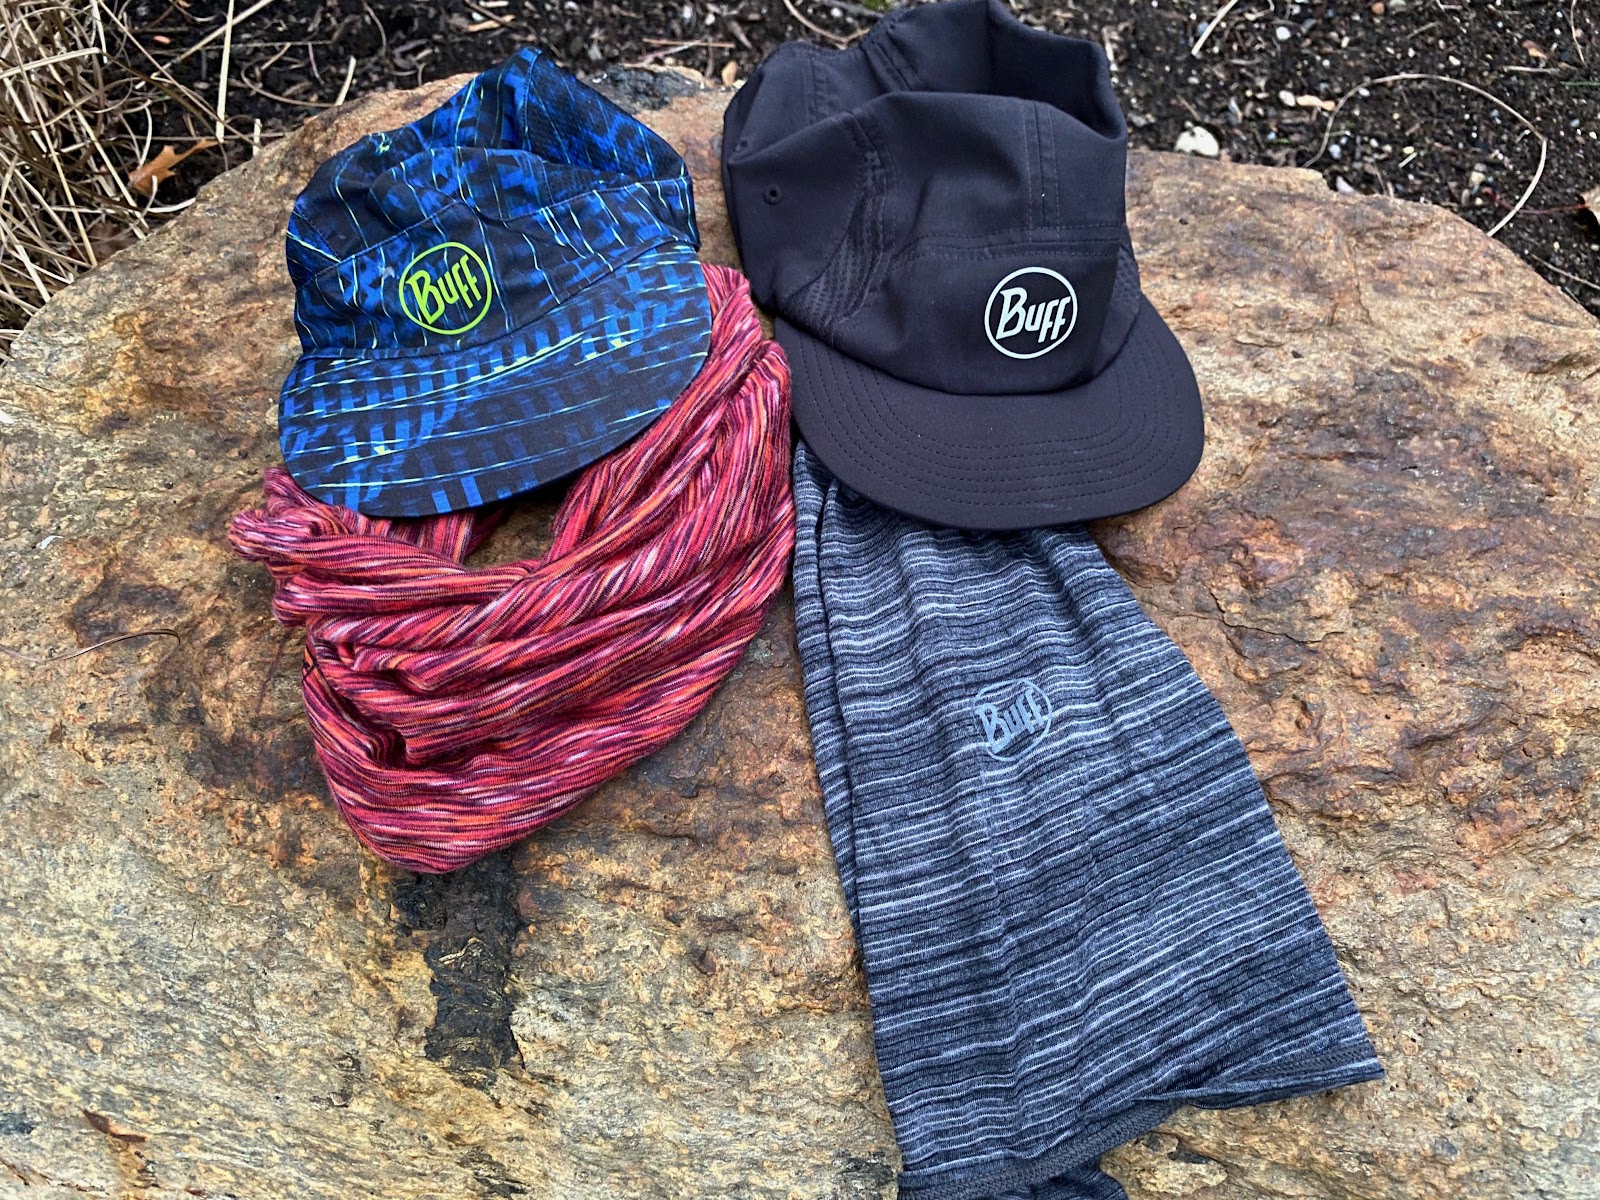 Road Trail Run: Review: Every Season, All Conditions BUFF has got you  Covered!